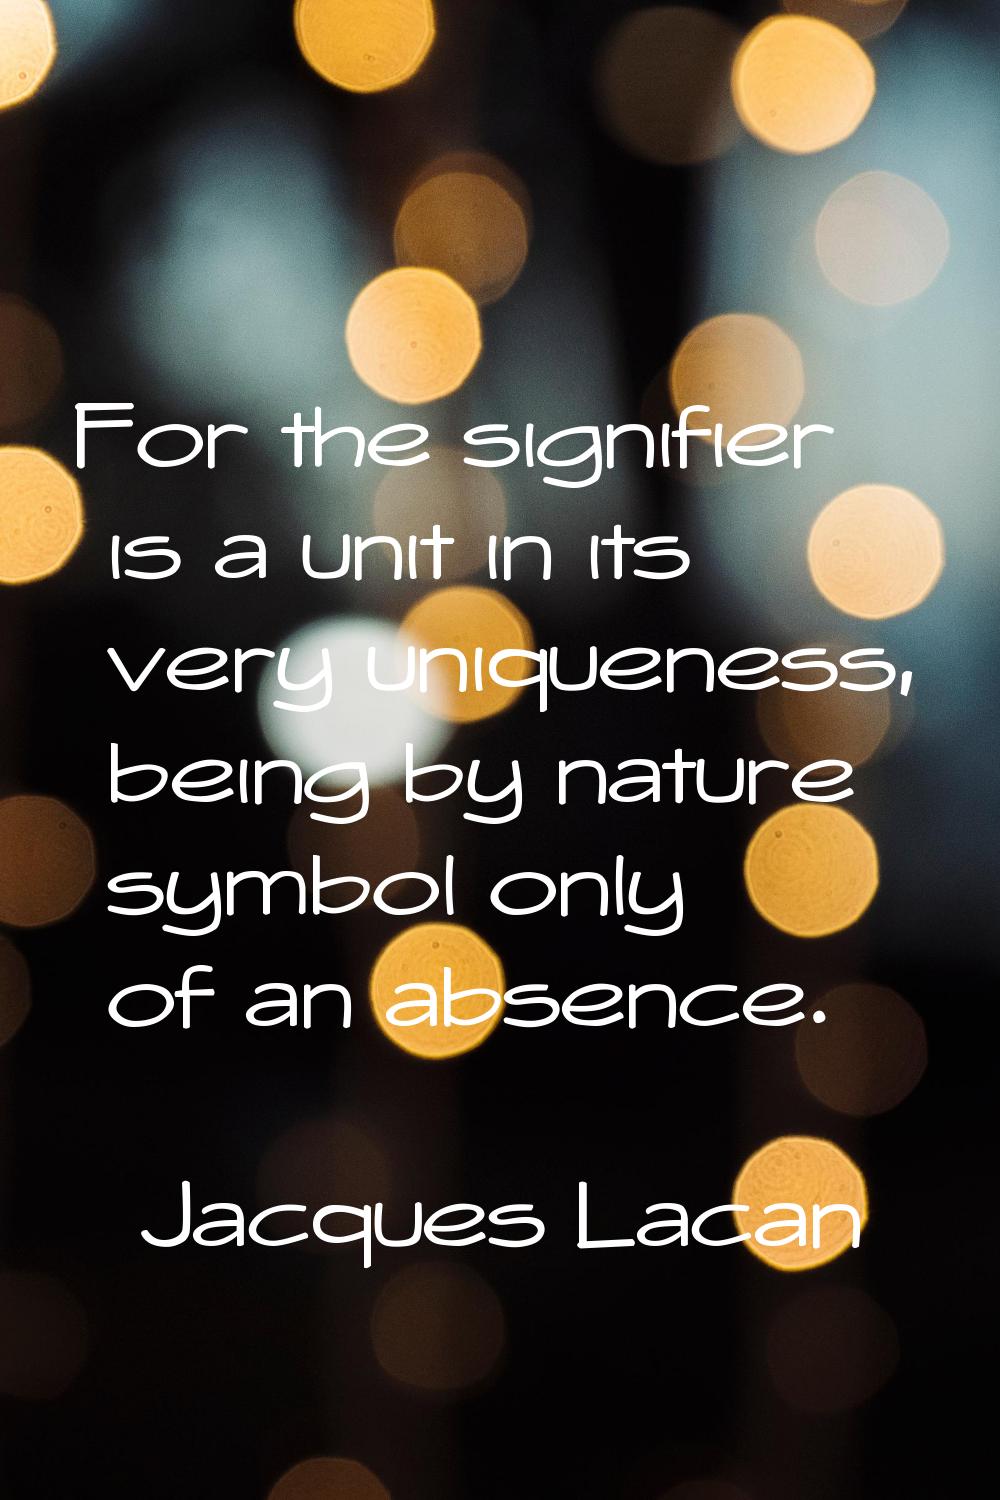 For the signifier is a unit in its very uniqueness, being by nature symbol only of an absence.